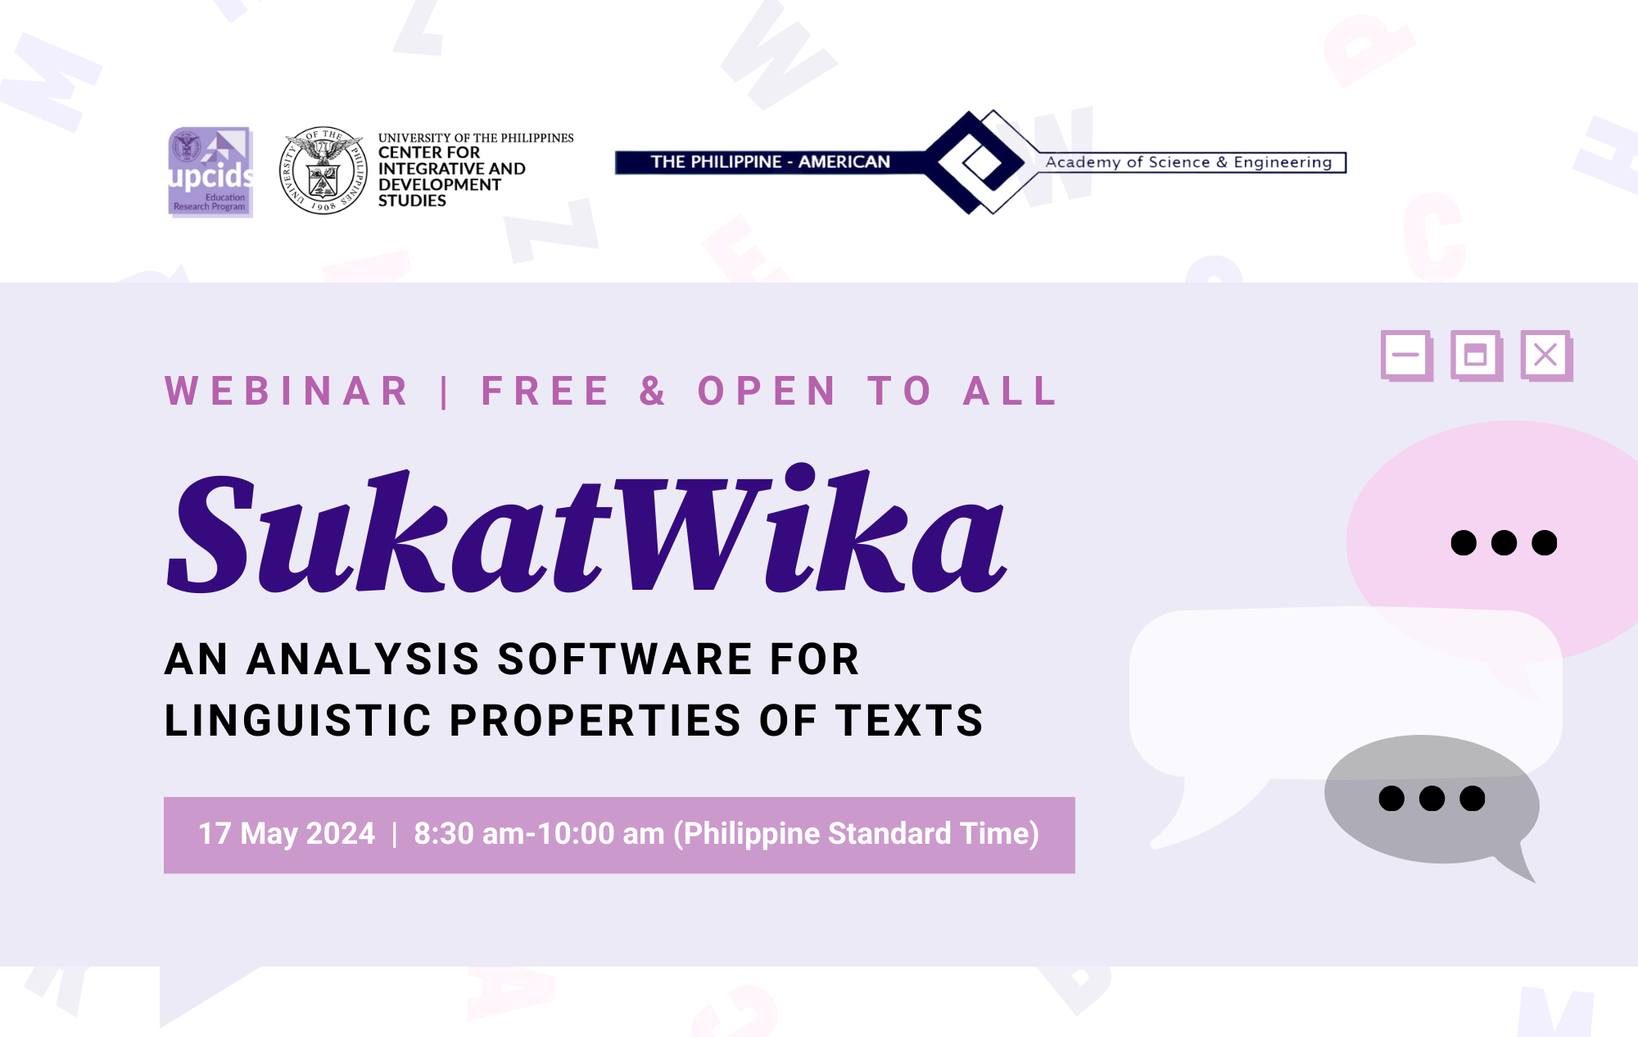 SukatWika: An Analysis Software for Linguistic Properties of Texts